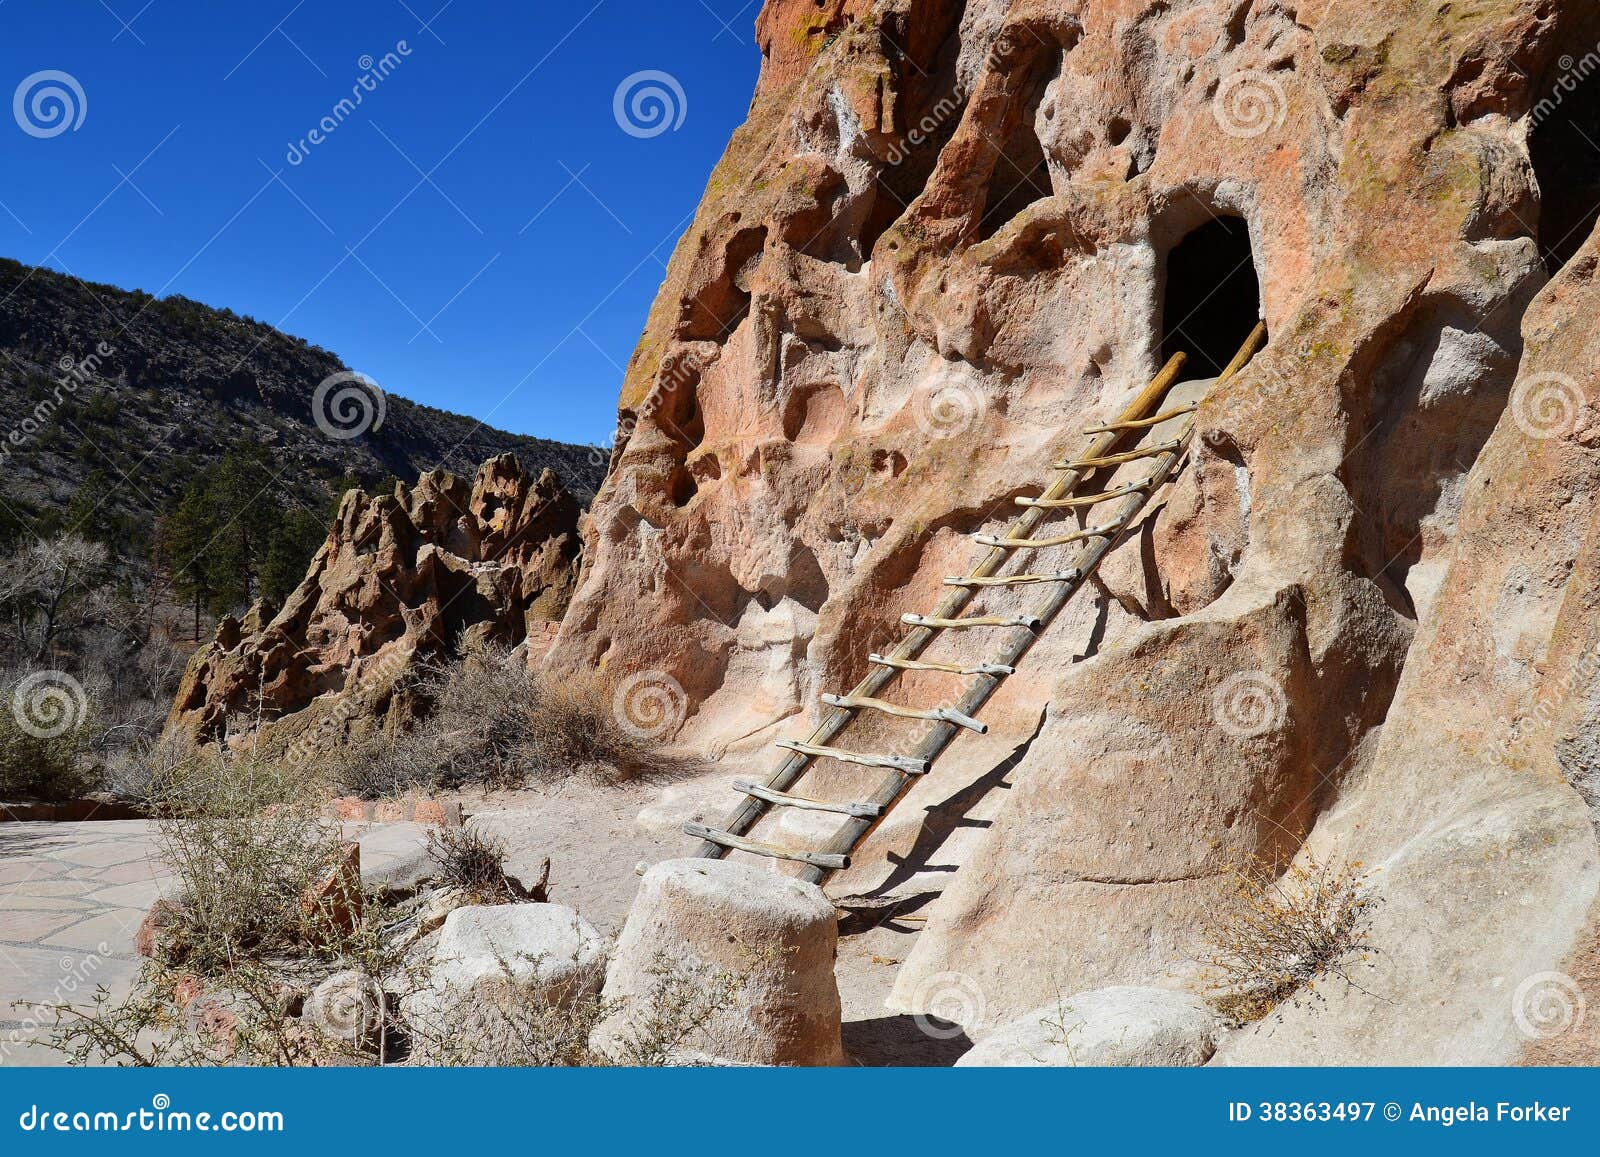 cliff cave dwelling with ladder